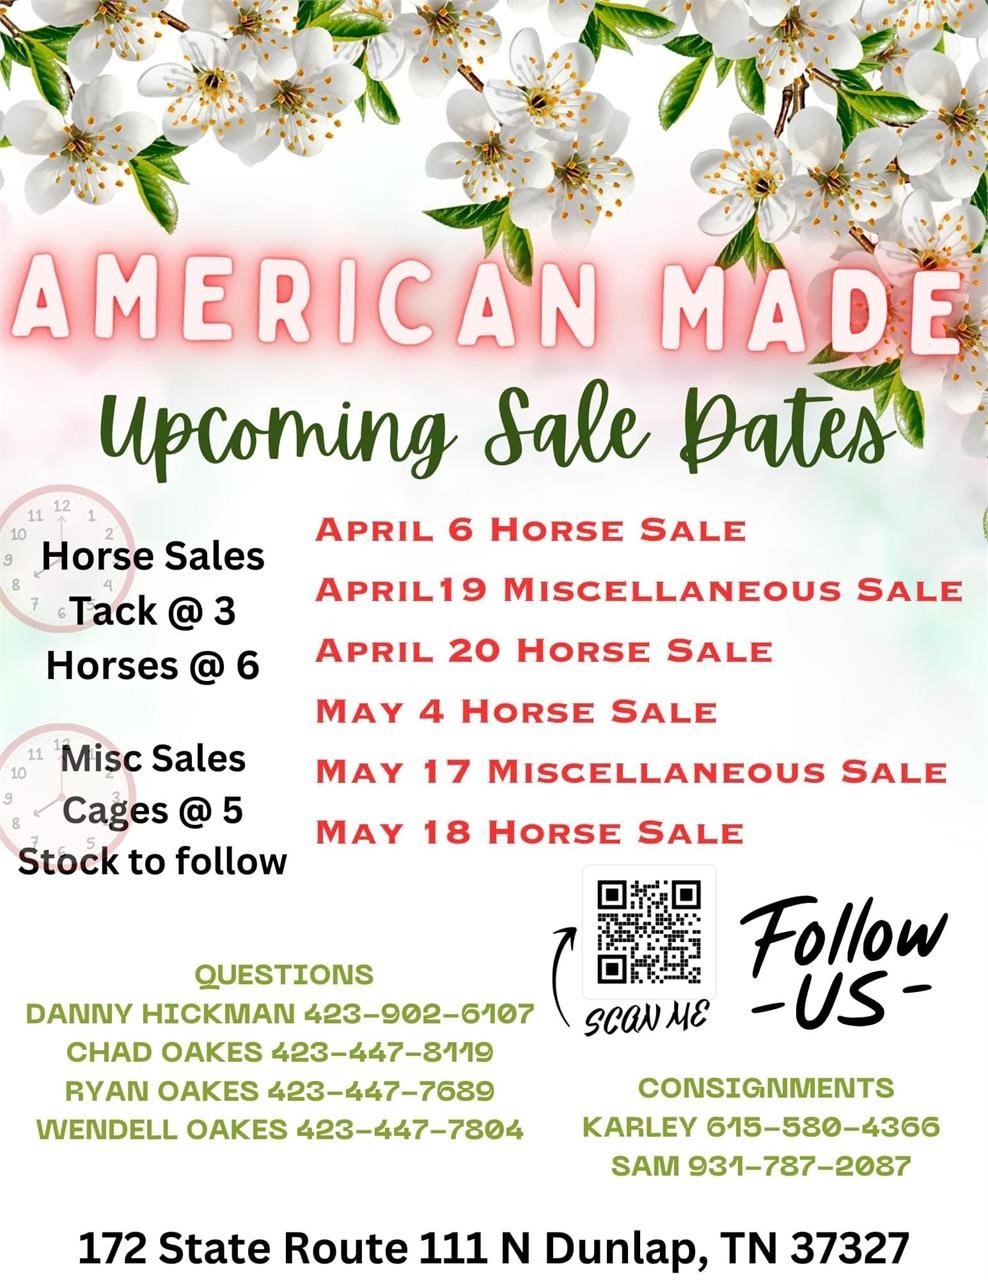 May 4th Horse Sale